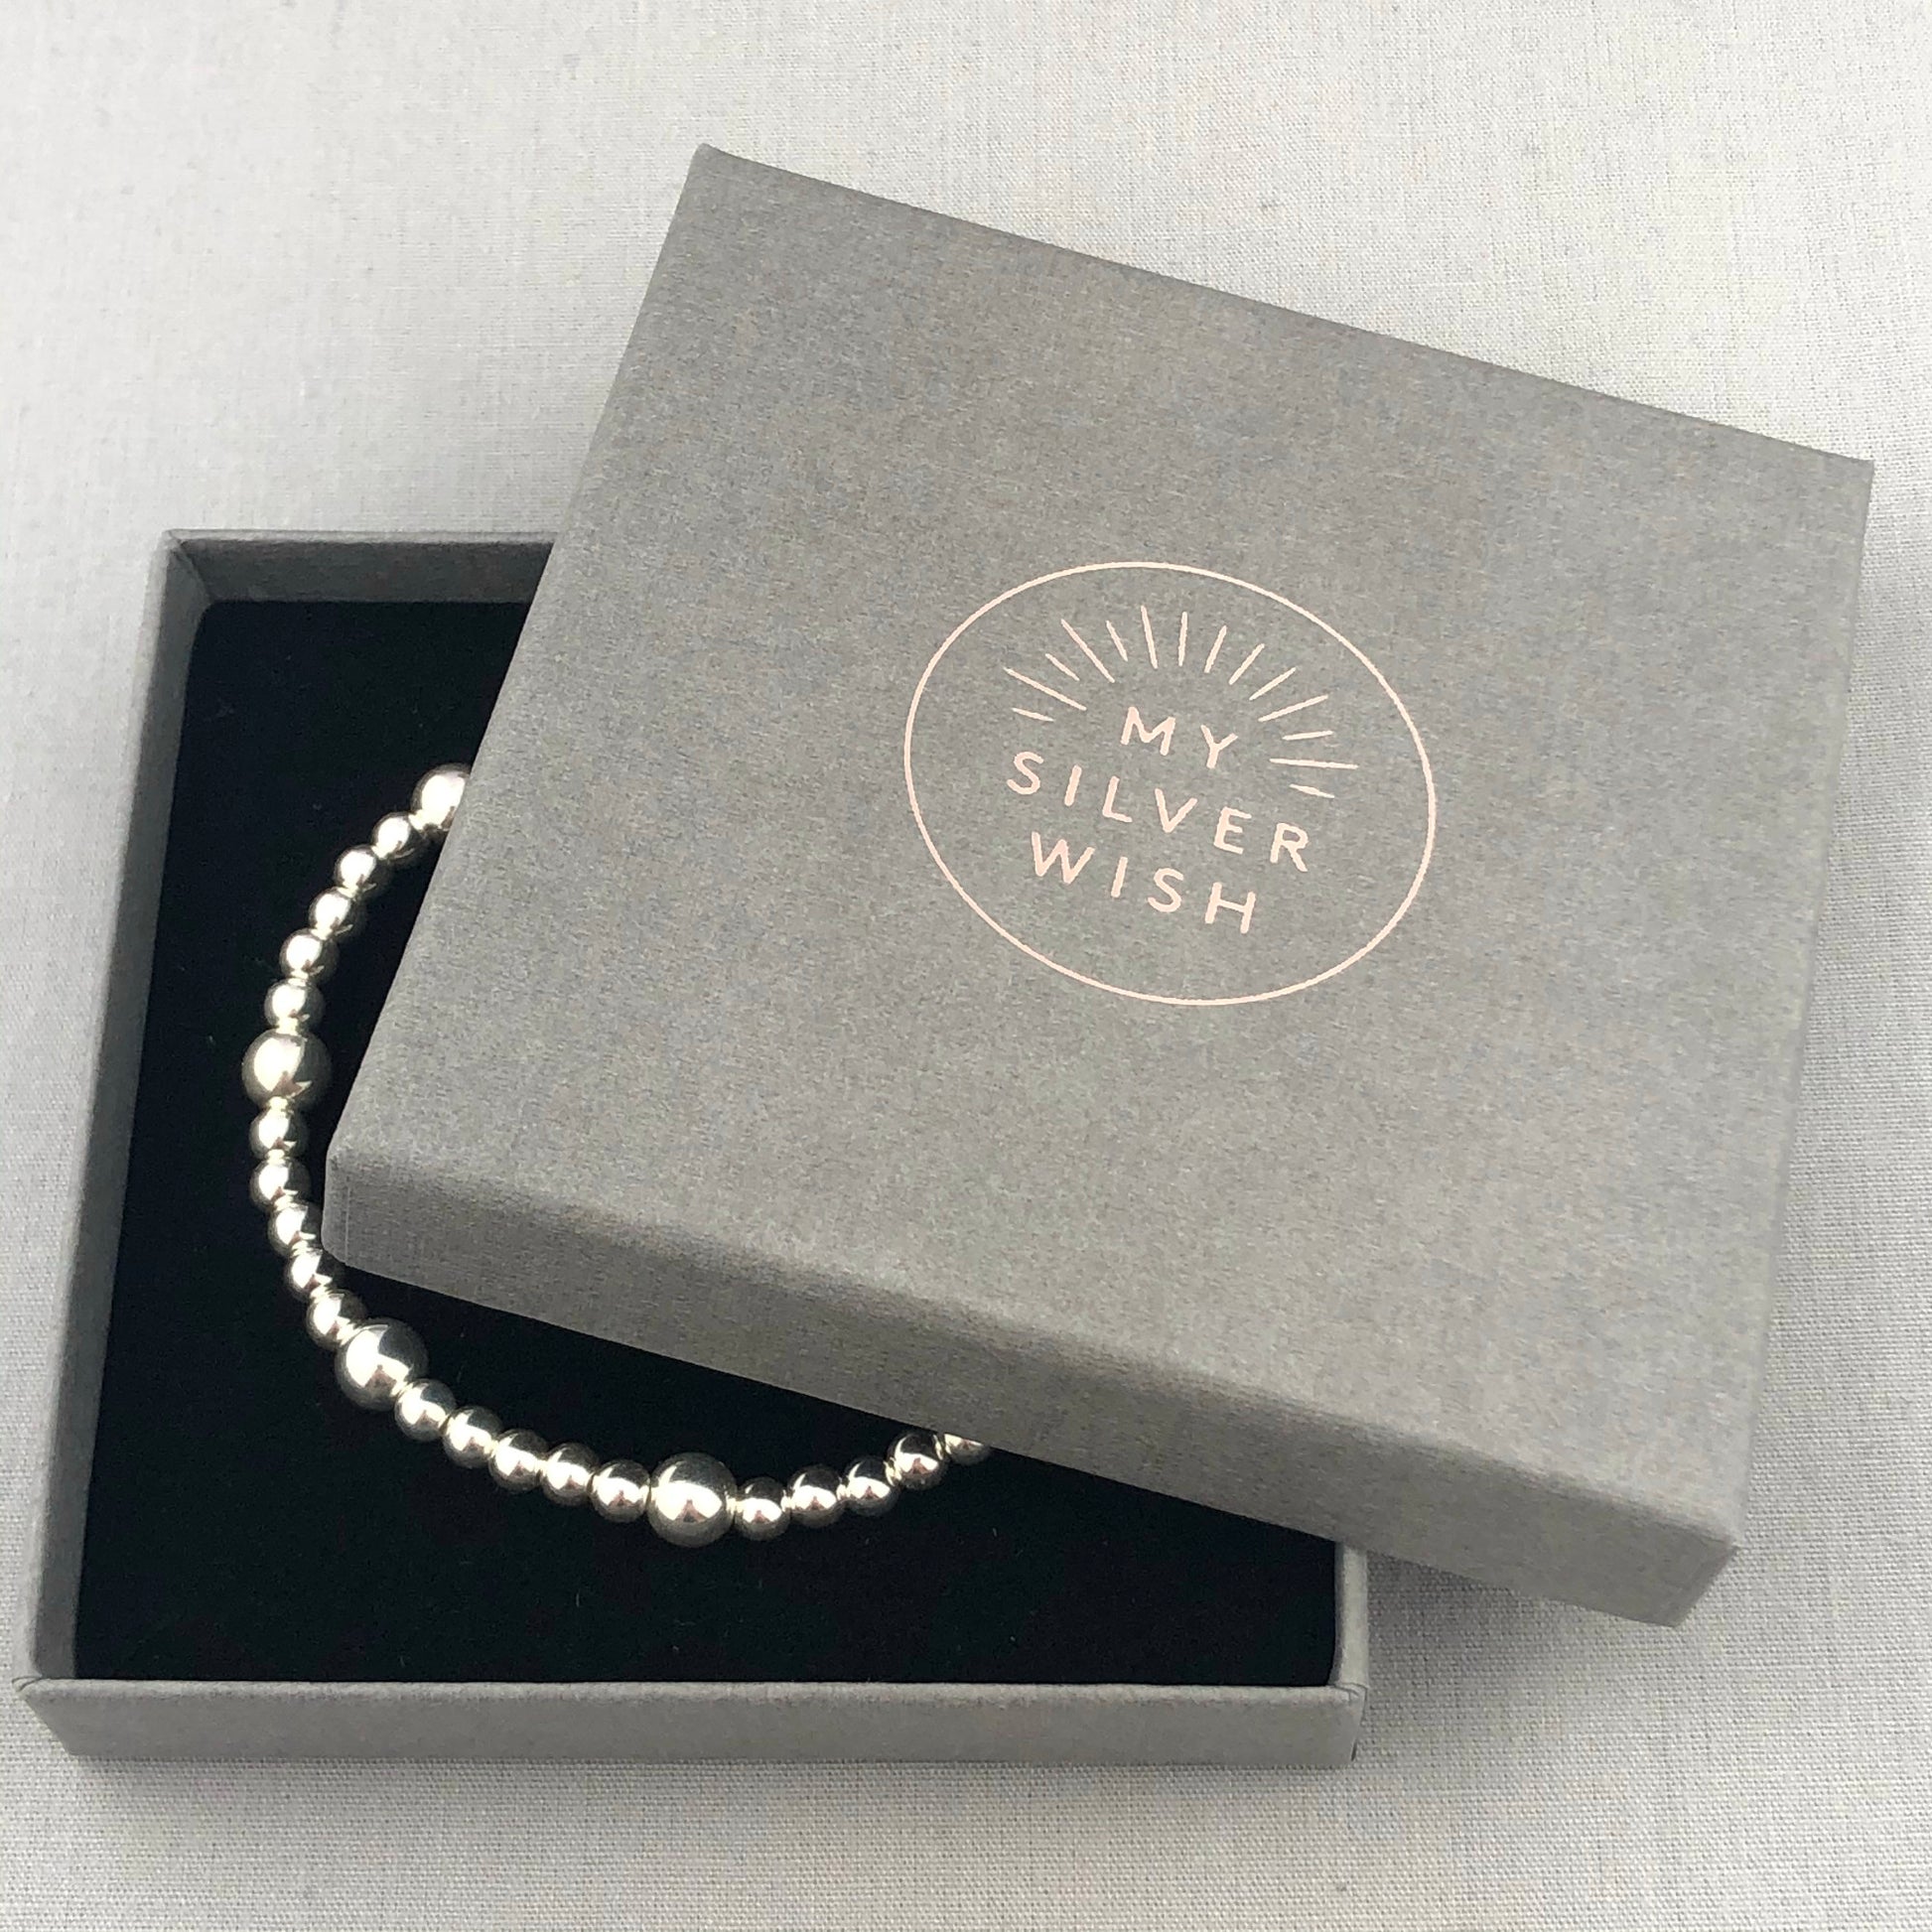 My Silver Wish Gift Box with Silver Stacking Bracelet inside